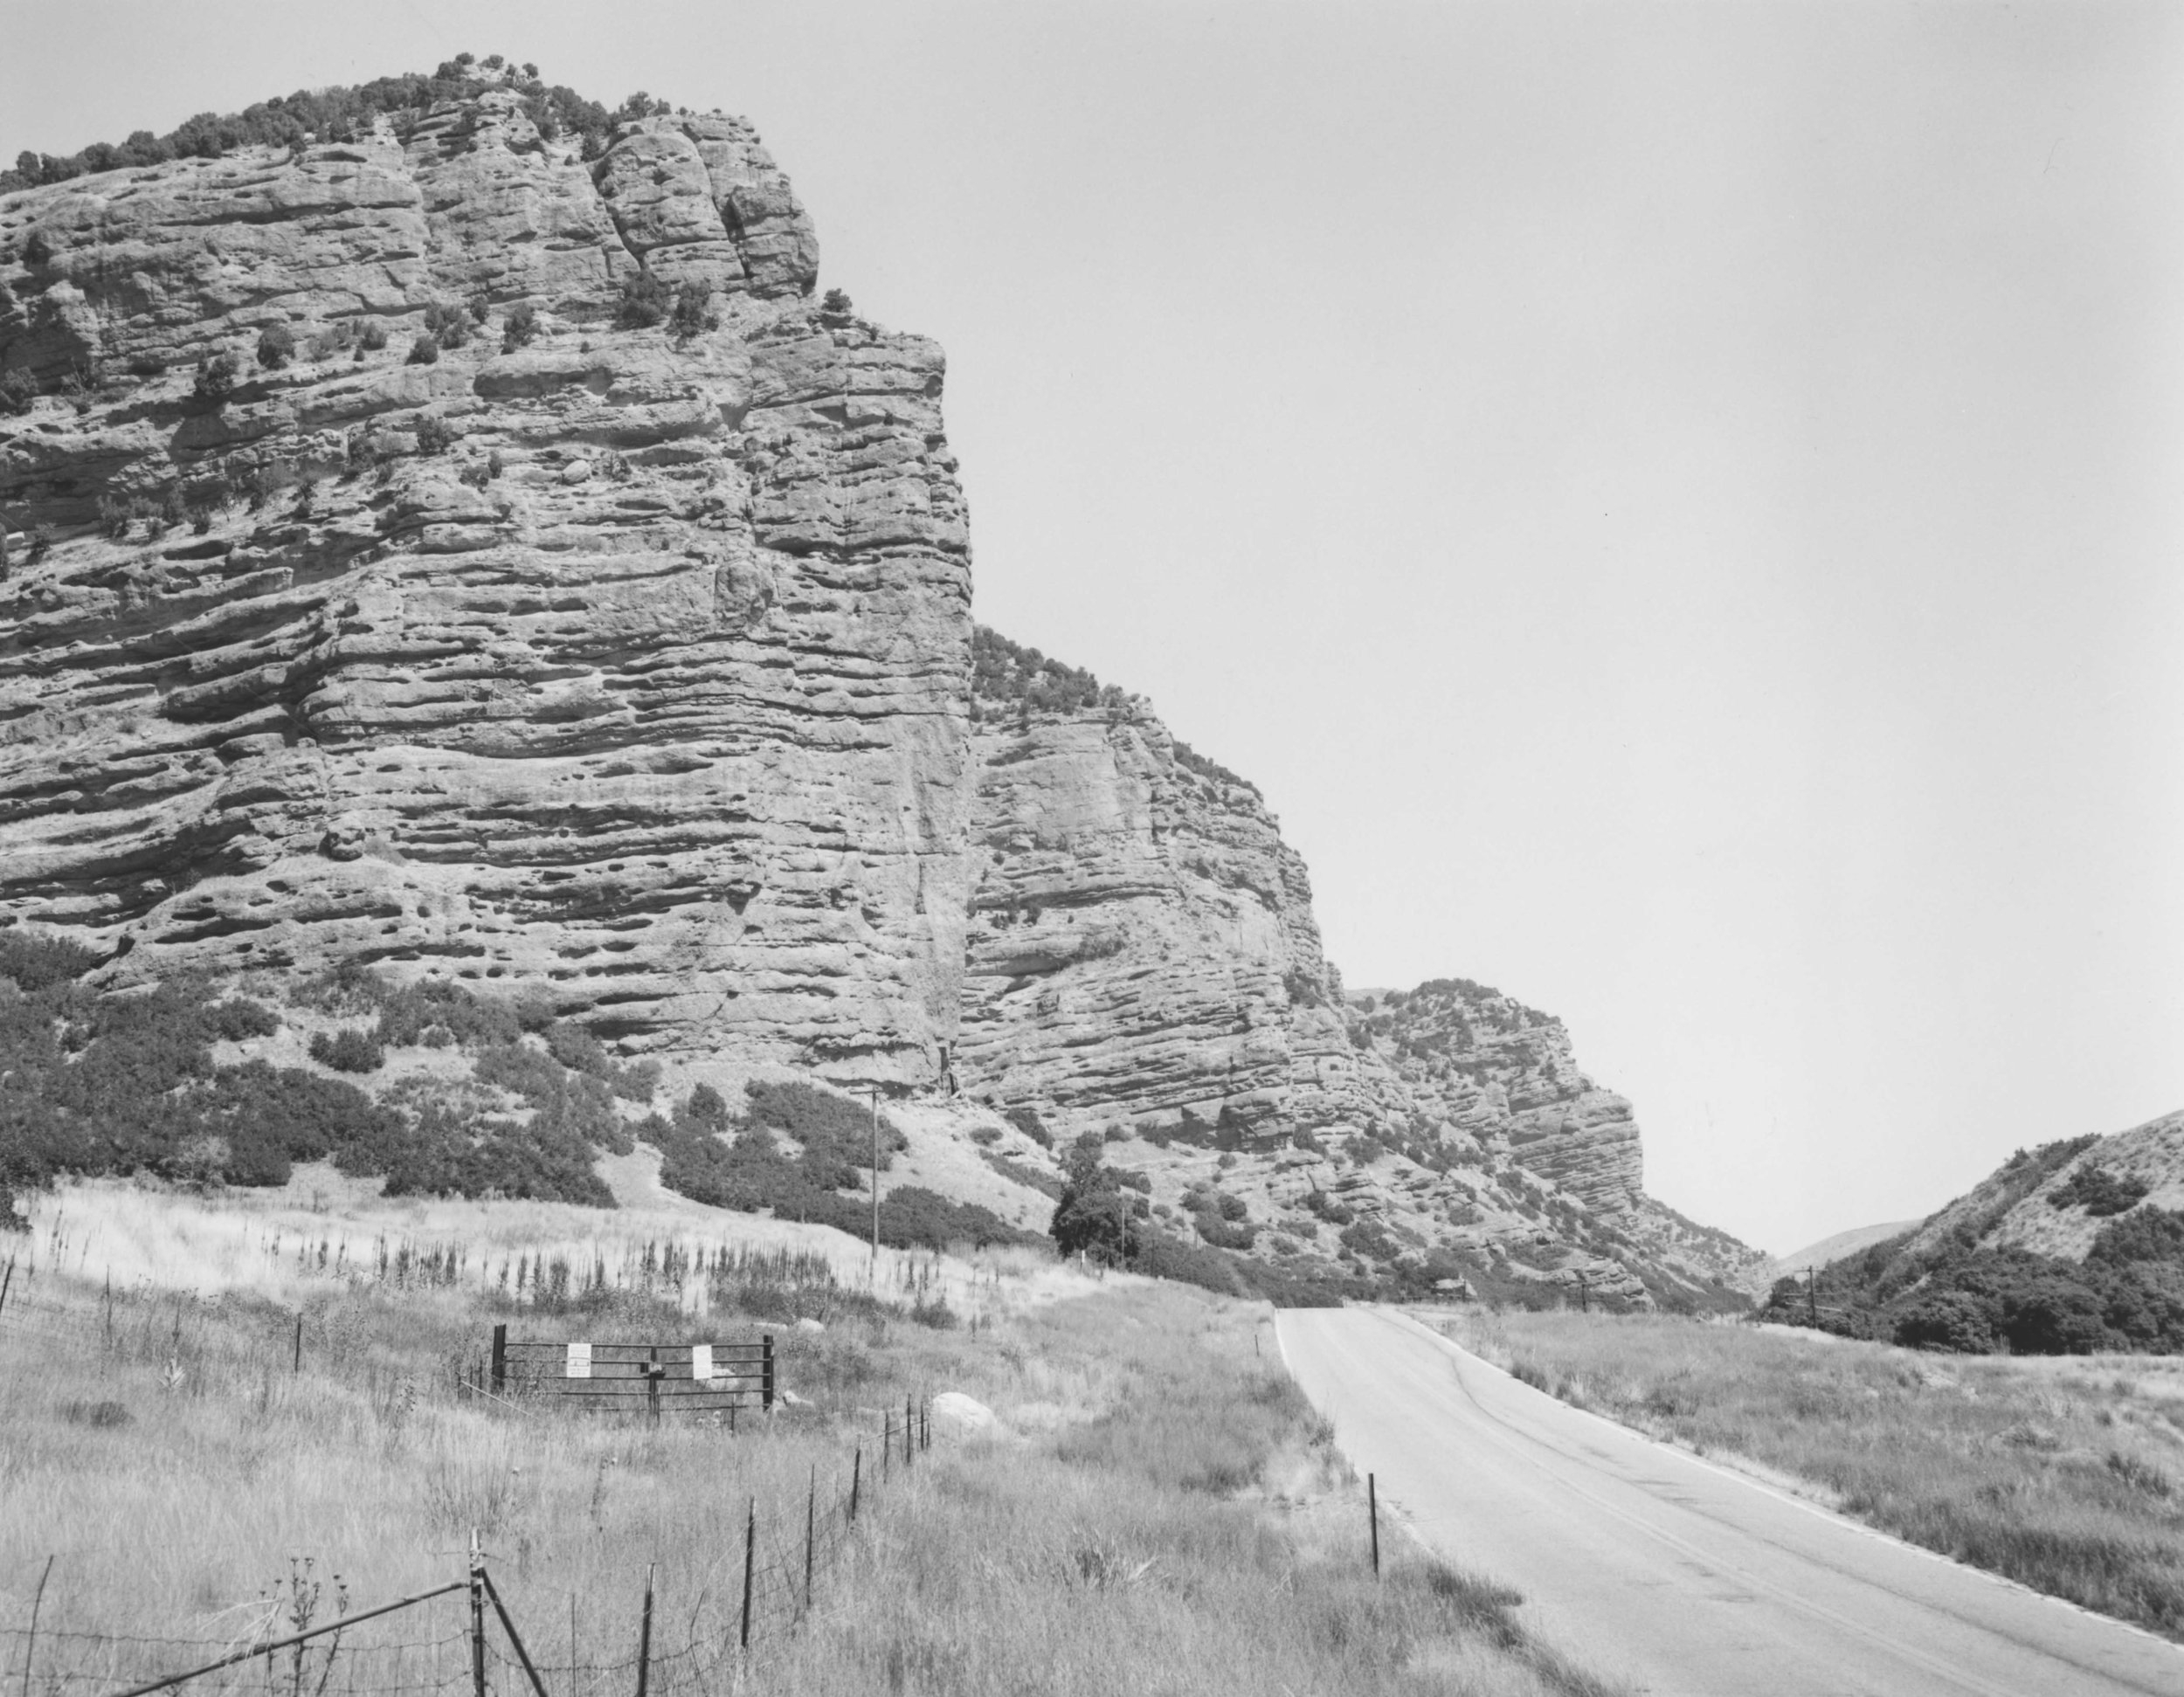   Steamboat Rock in Echo Canyon near the Wyoming border. Travelers using the Mormon Overland Trail named this formation after a steamboat bow.&nbsp;From 1847 to 1867, 80,000 Mormon immigrants traveled this way by wagon and handcart.   